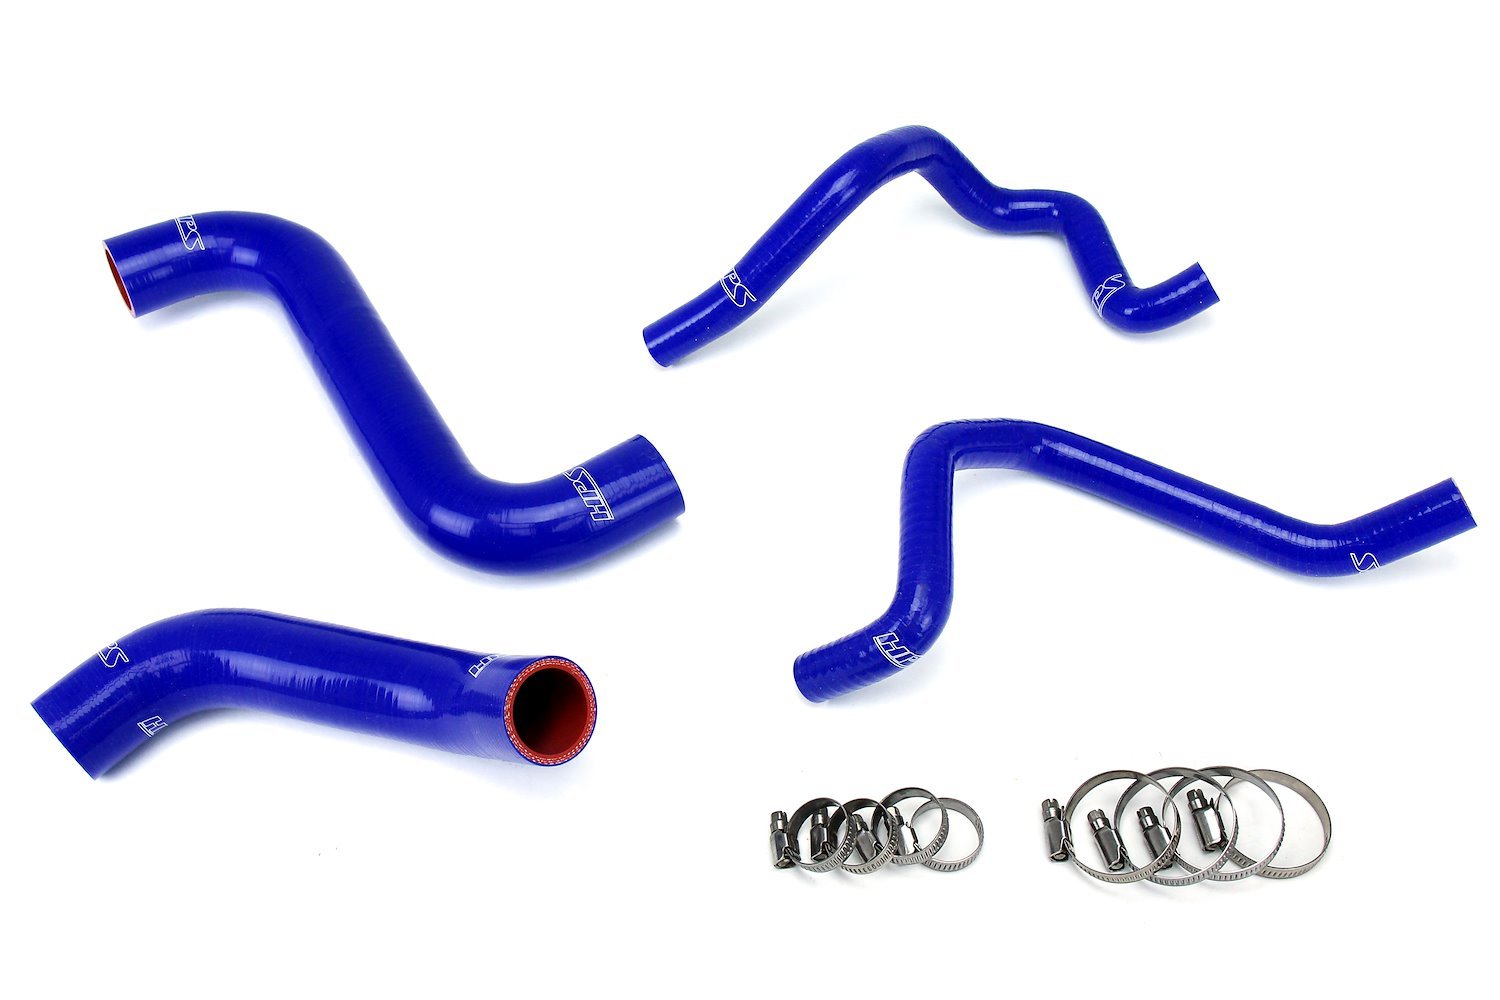 57-1811-BLUE Radiator and Heater Hose Kit, 3-Ply Reinforced Silicone, Replaces Rubber Radiator & Heater Coolant Hoses